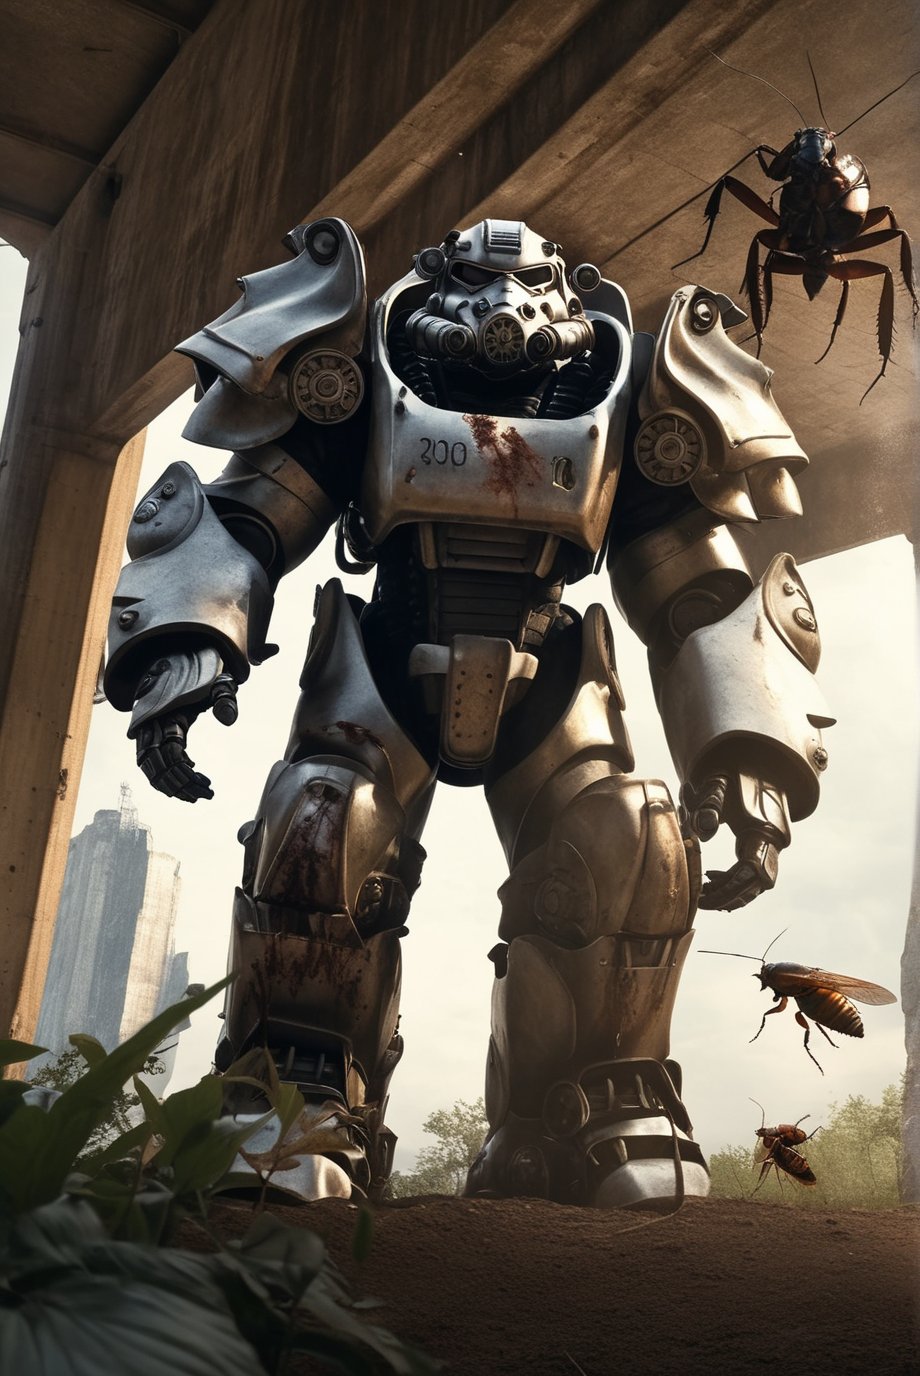 falloutcinematic, power armor, bear scratches, giant cockroaches, from below, in wasteland under bridge environment, outdoors, pillar, , science fiction, realistic